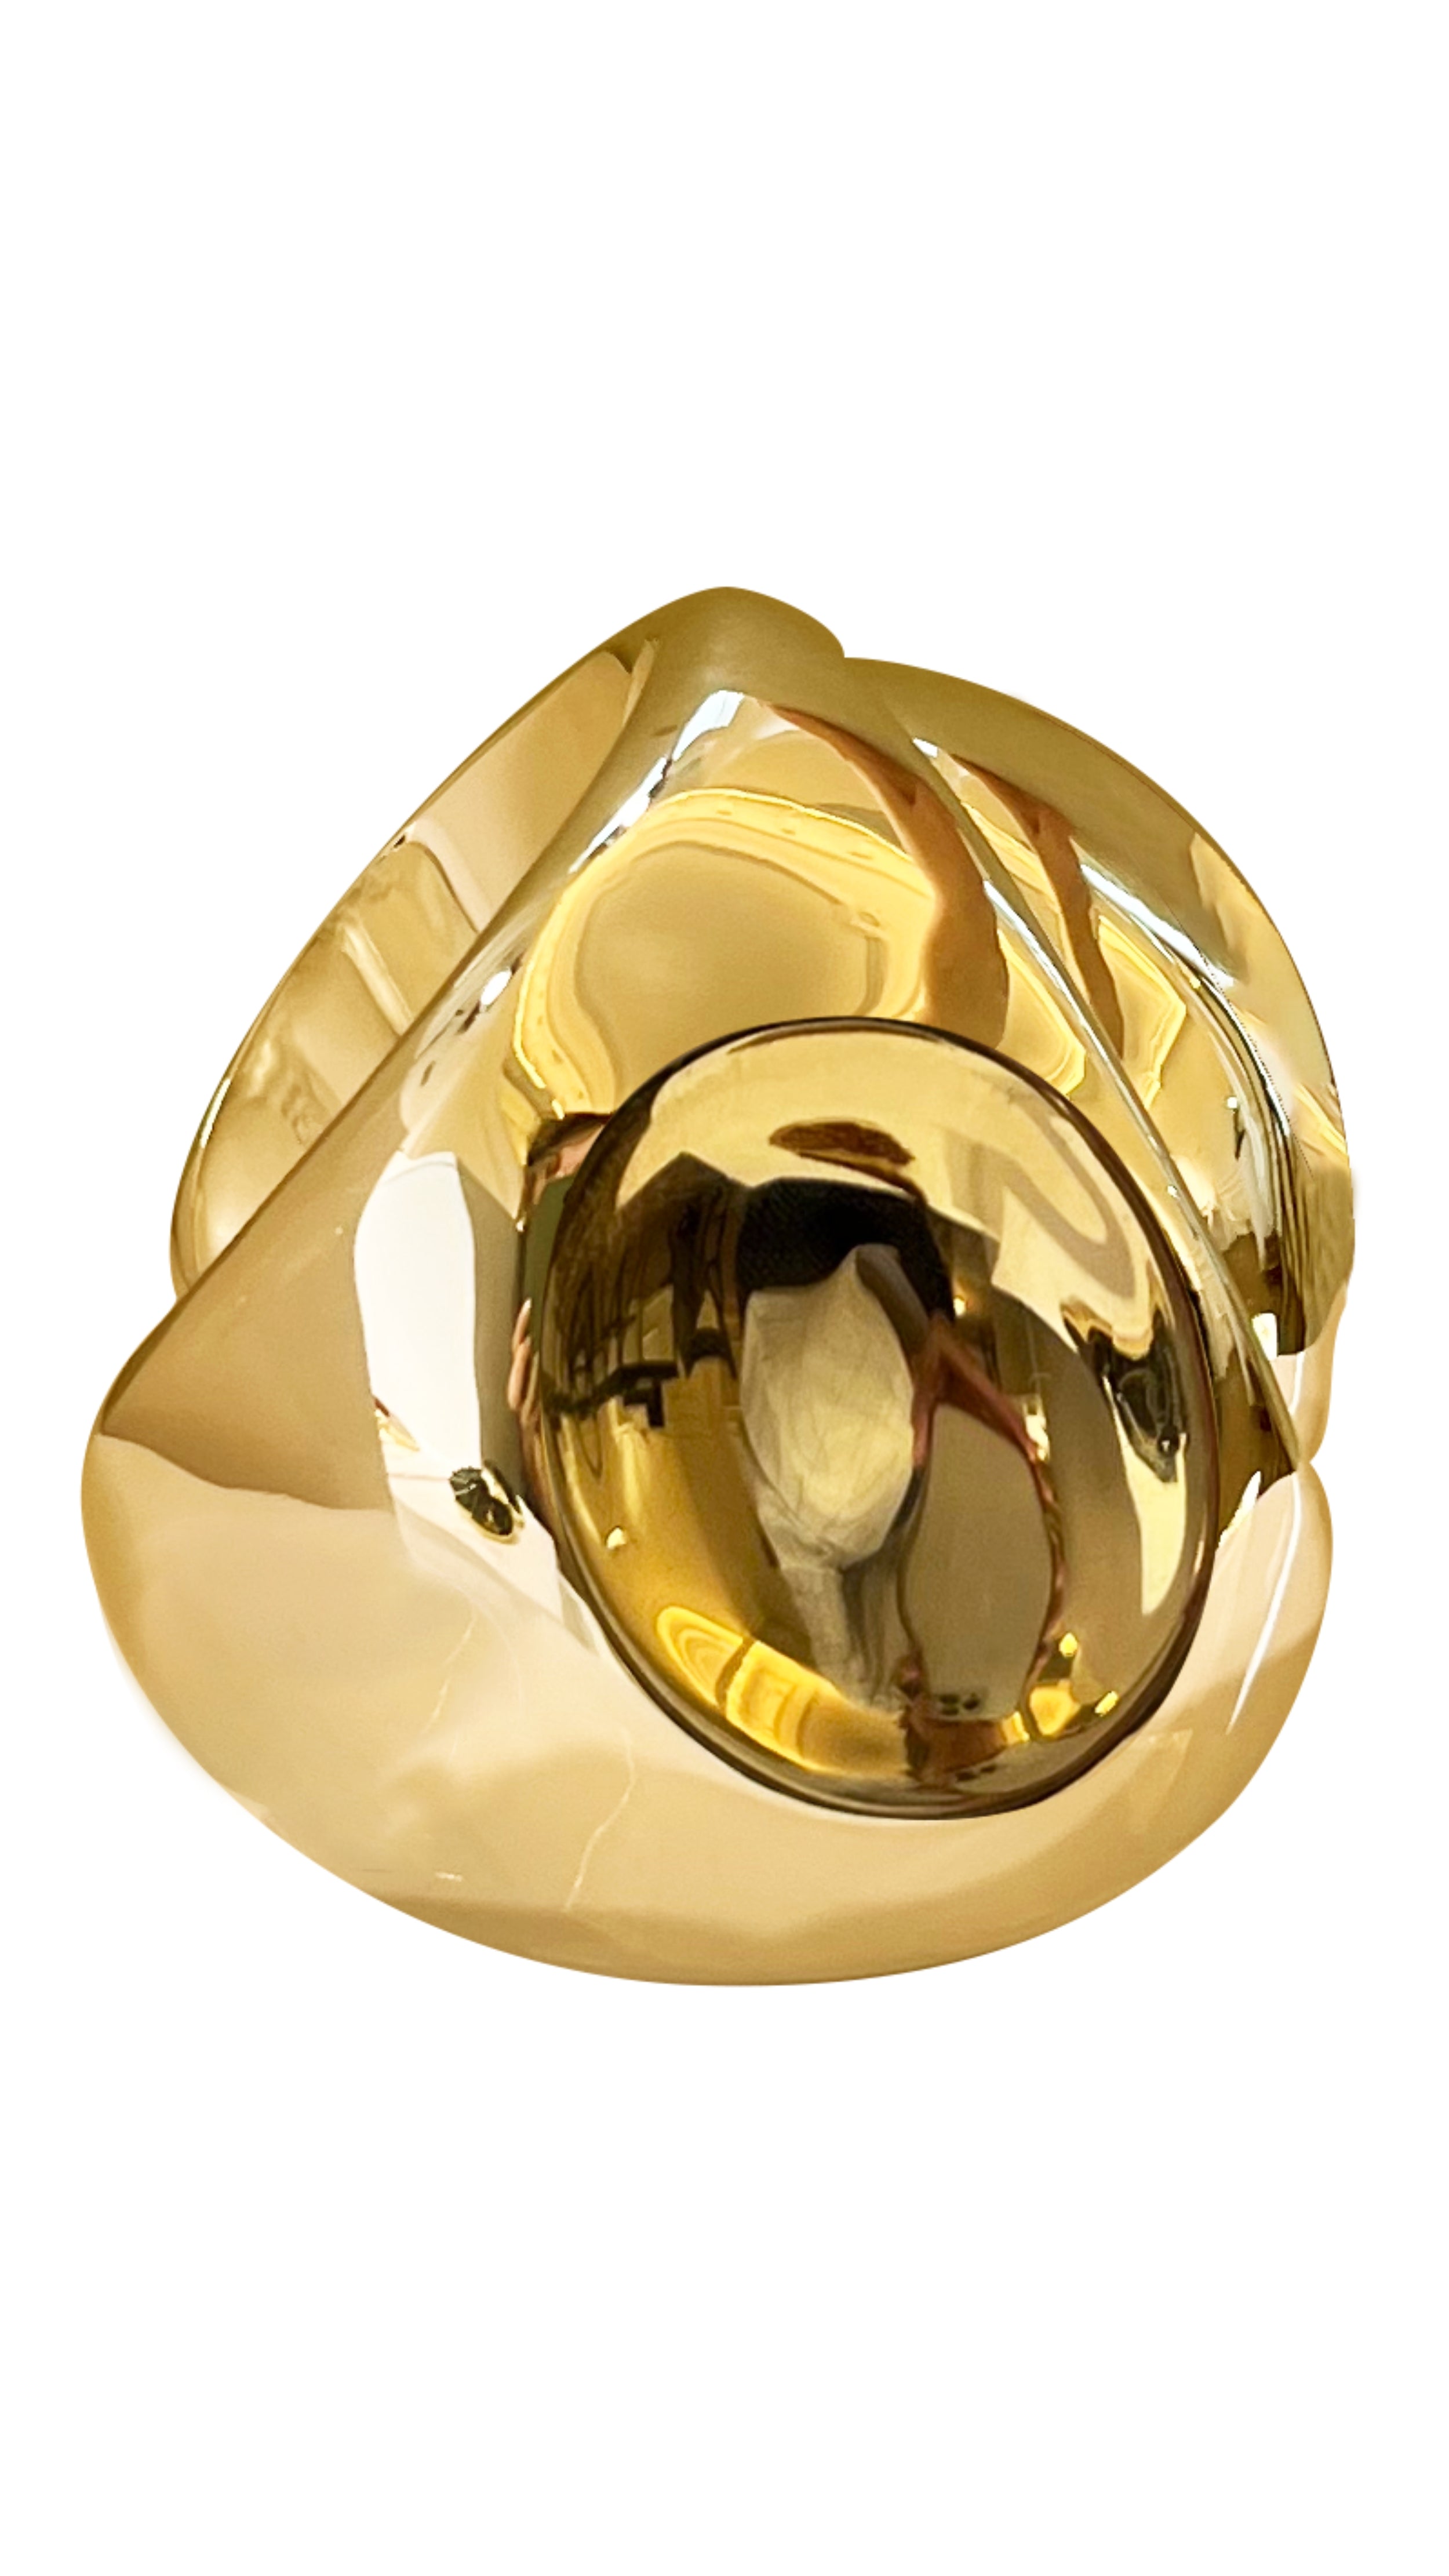 Monica Sordo Cubagua Cuff Bracelet is a statement piece crafted in beautiful organic shaped 24 carat plated gold. Photo shows cuff bracelet from the the side. Sustainable and fair trade jewelry.